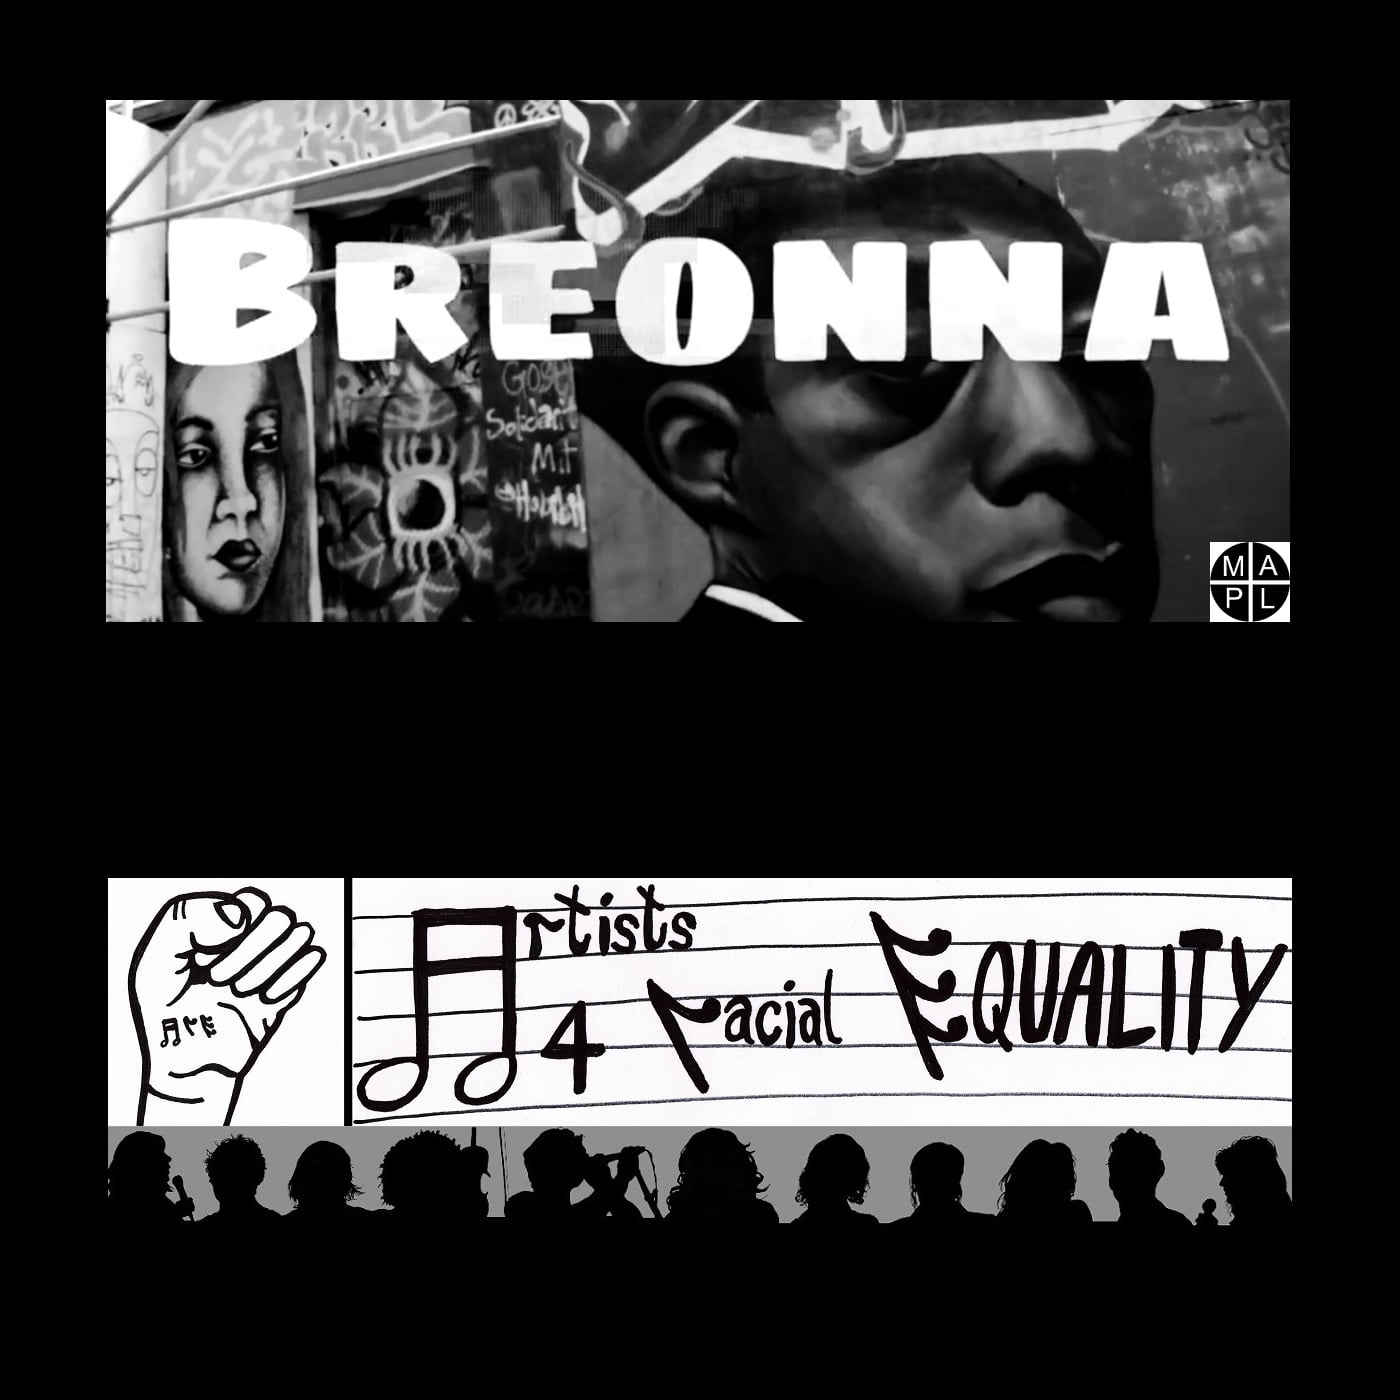 Artists 4 Racial Equality (ARE) is a group of Canadian musicians and visual artists who want the world to remember Breonna Taylor.